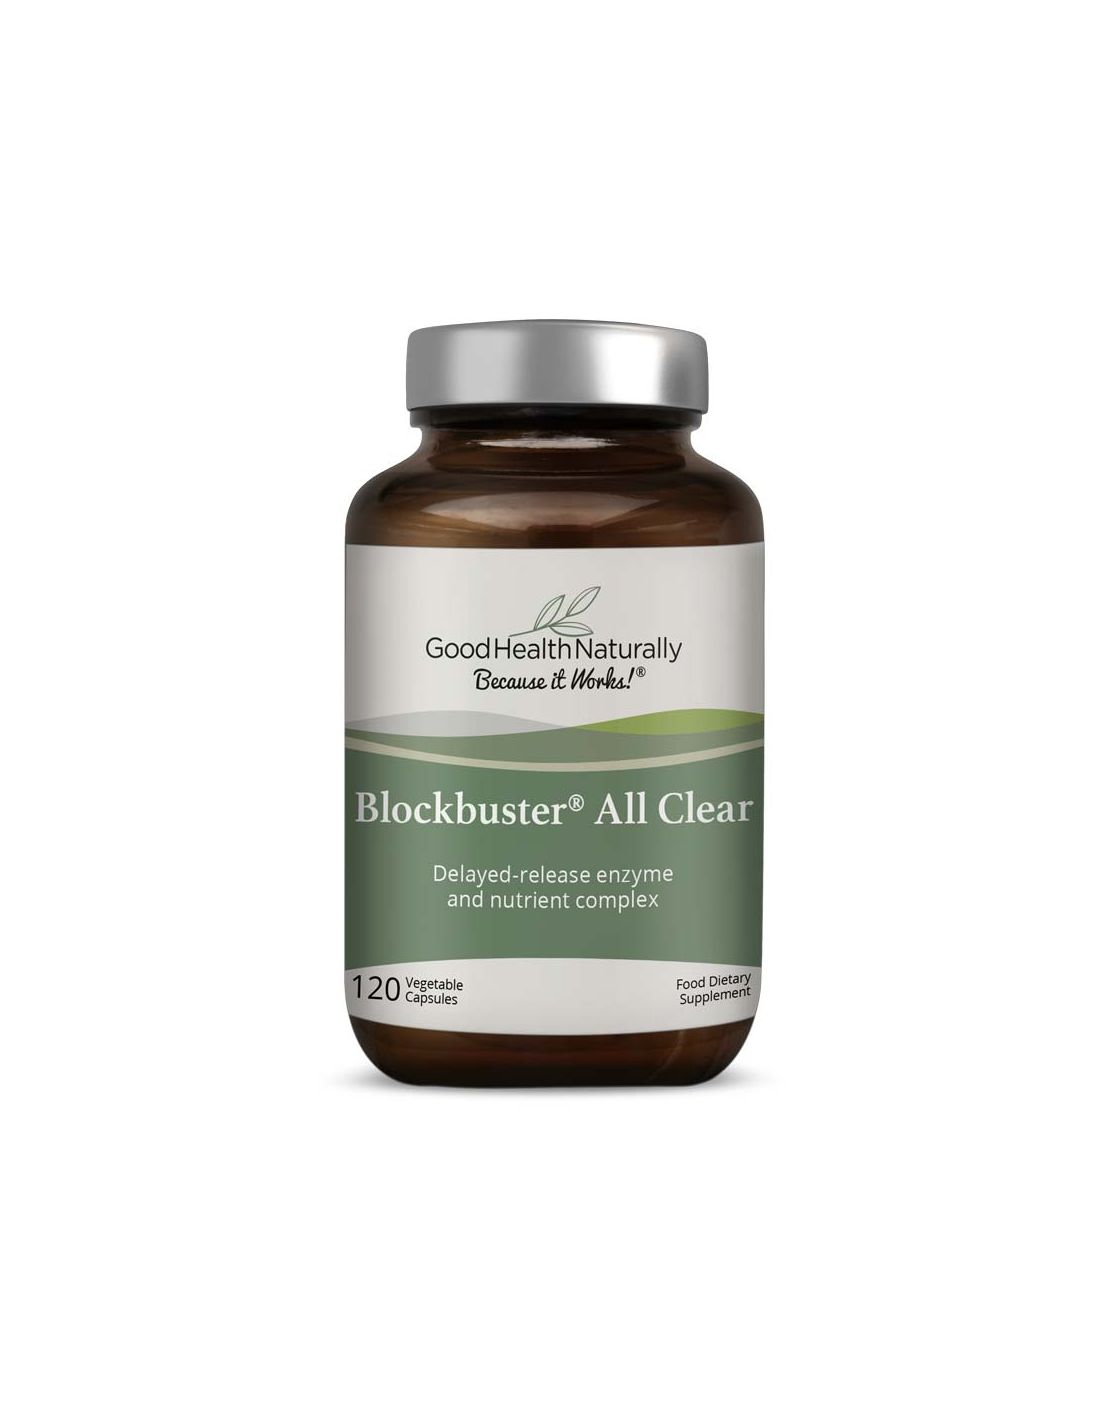 Blockbuster® All Clear 120 Delayed Release Capsules - Glass Jar